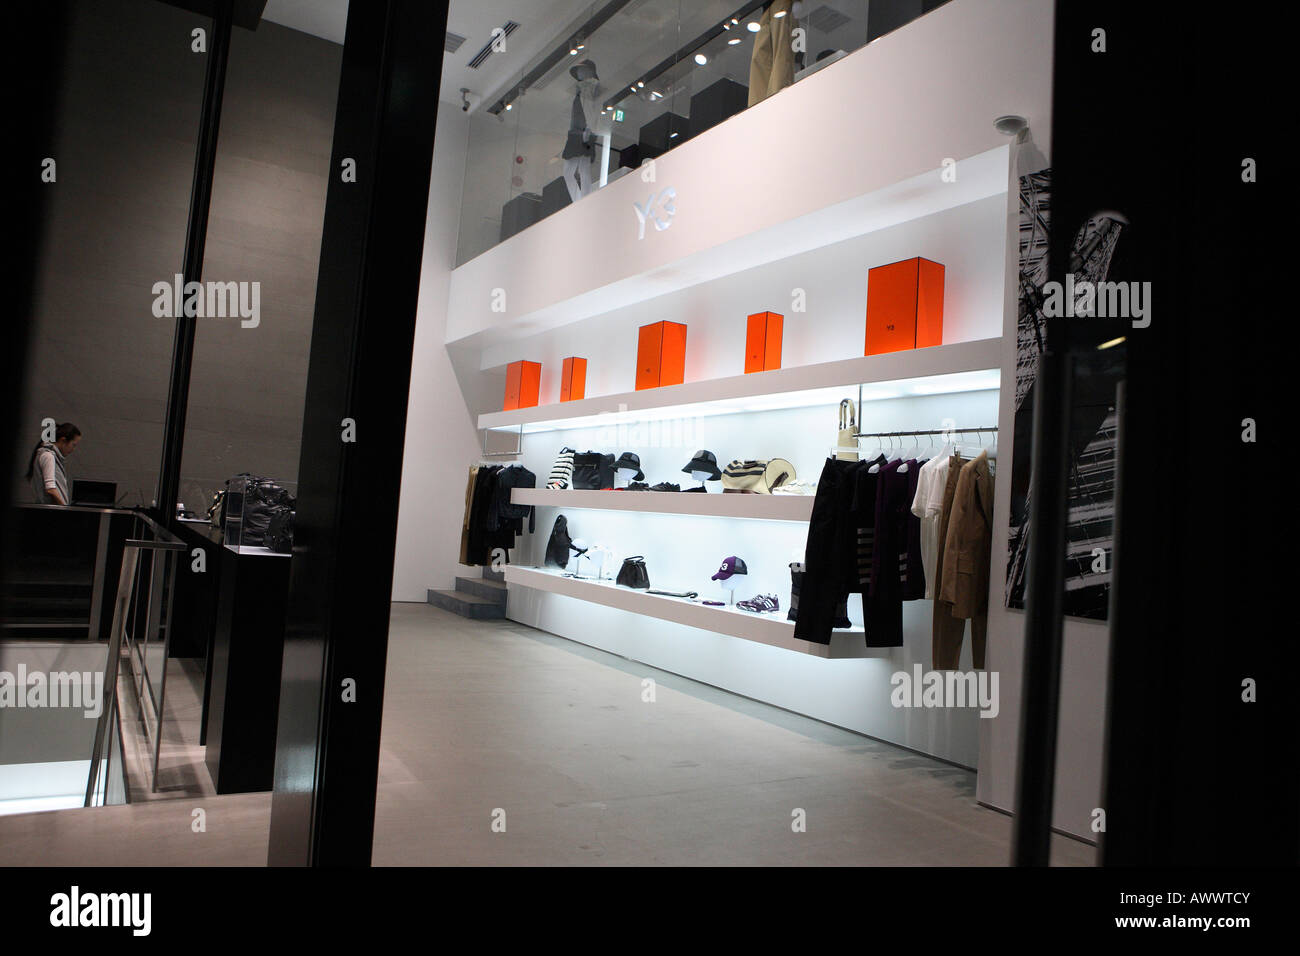 Y3 Store in Aoyama Stock Photo - Alamy